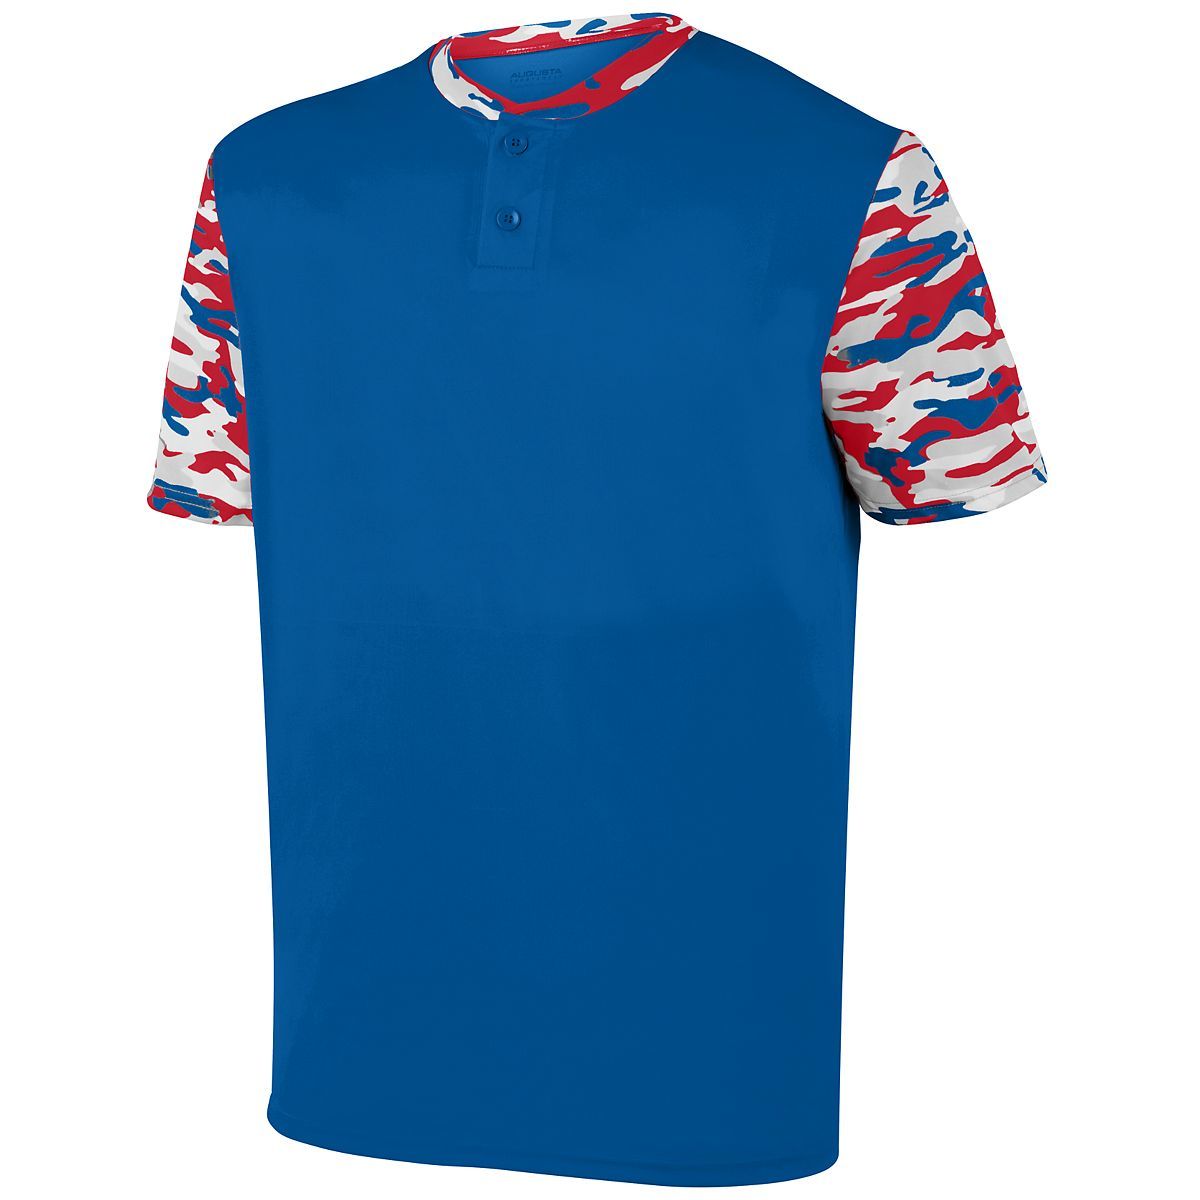 Augusta Sportswear Pop Fly Jersey in Royal/Red Royal Mod  -Part of the Adult, Adult-Jersey, Augusta-Products, Baseball, Shirts, All-Sports, All-Sports-1 product lines at KanaleyCreations.com